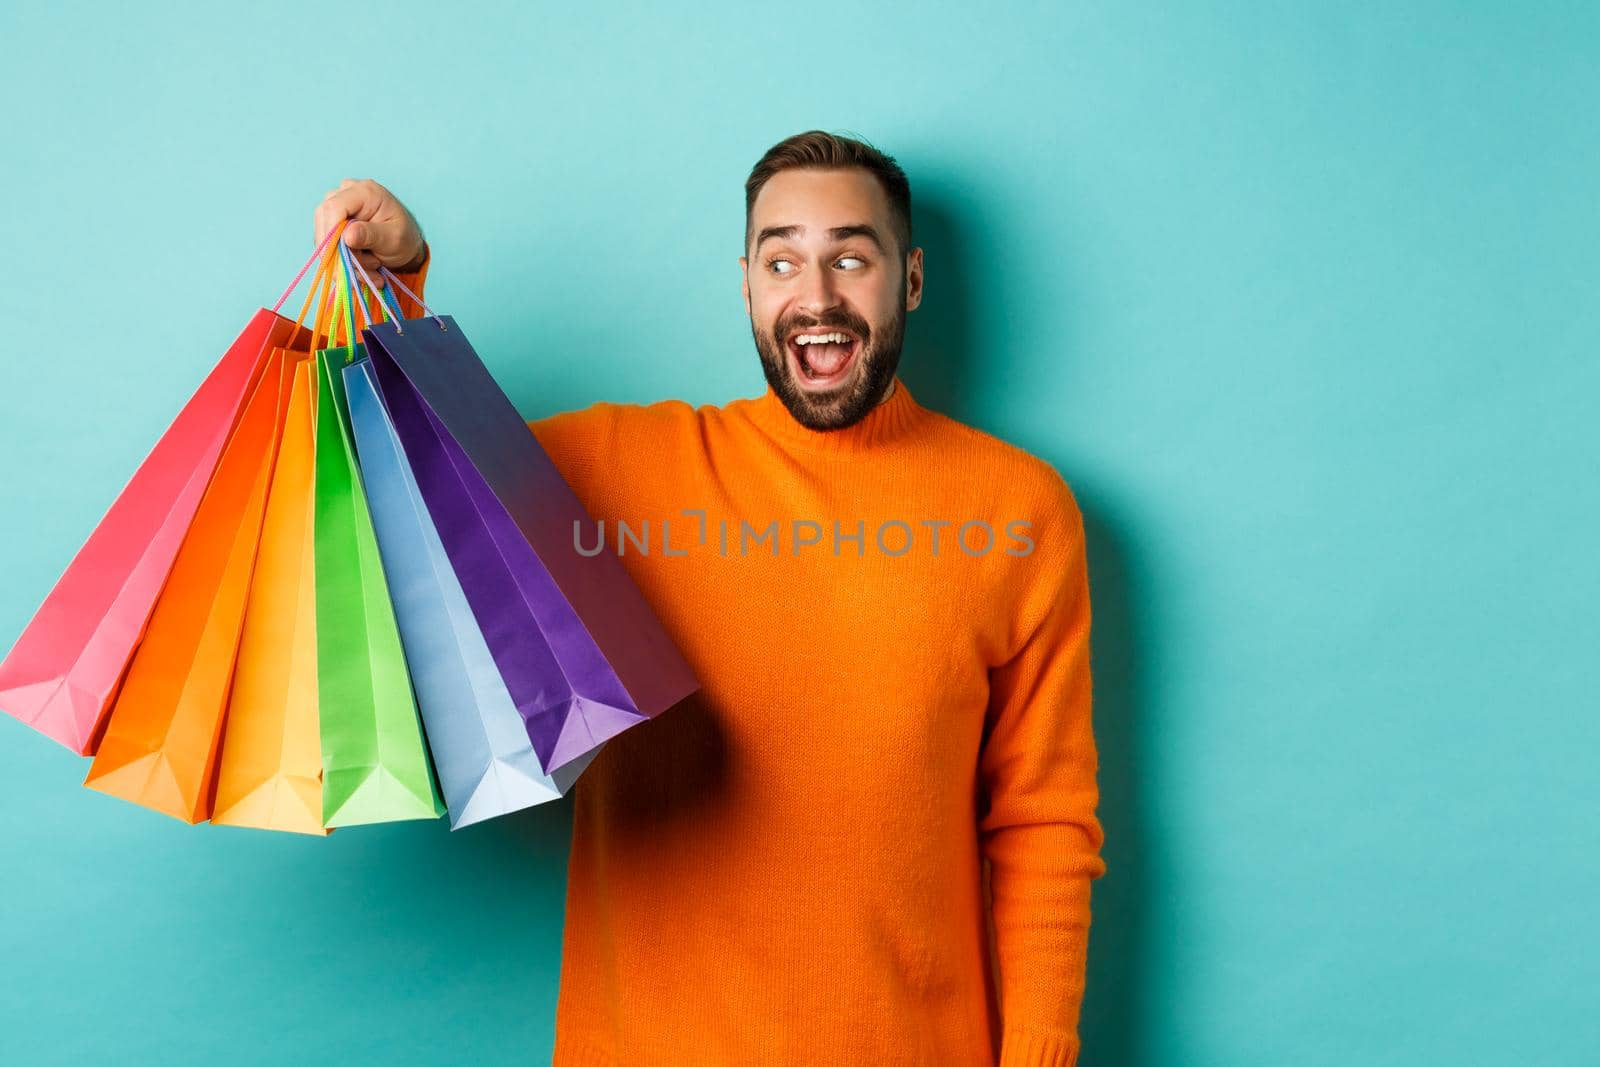 Happy young man going shopping, holding bags and looking excited, standing in orange sweater over blue background.